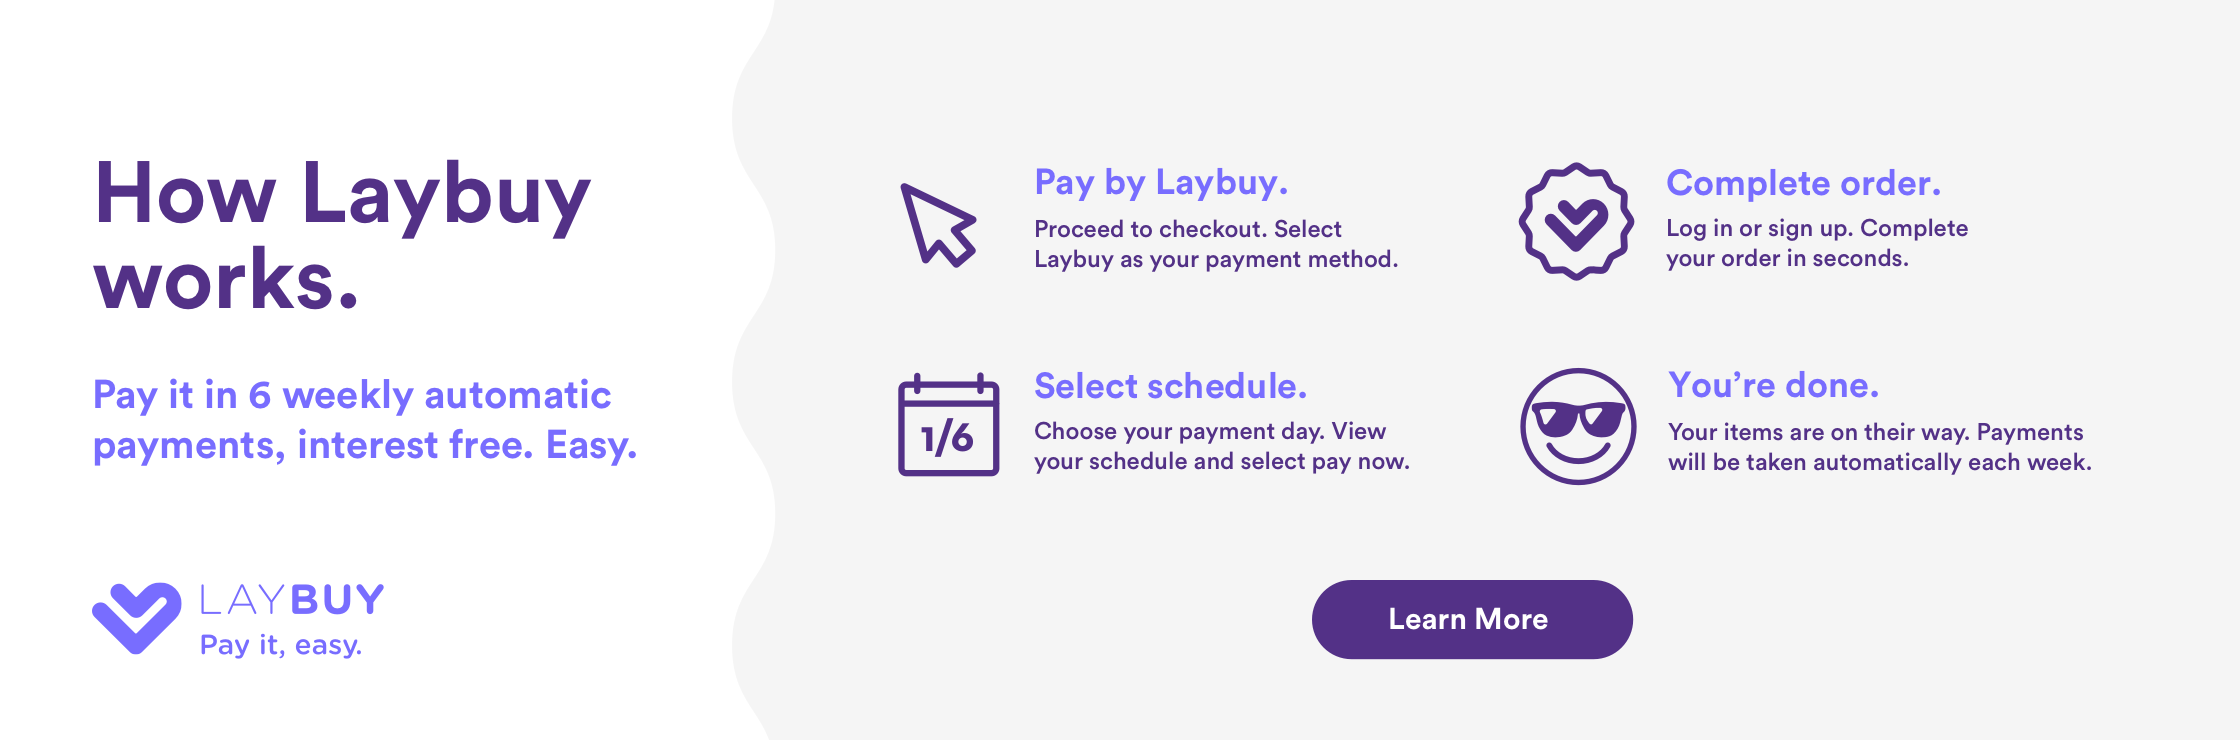 How Laybuy Works